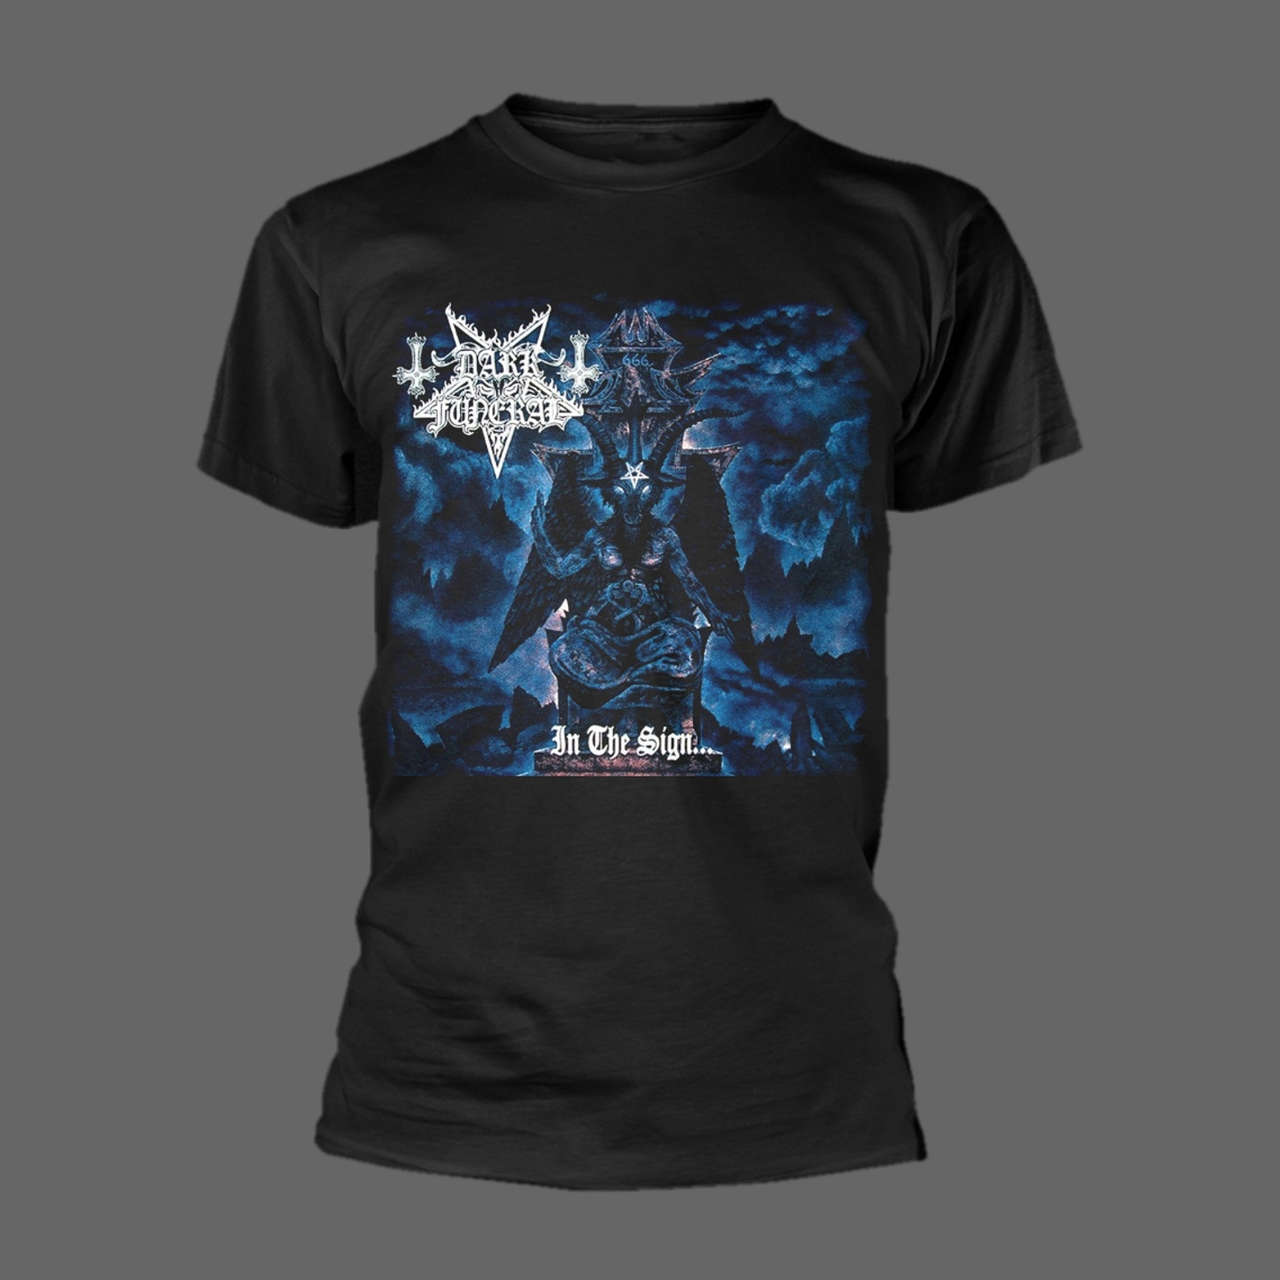 Dark Funeral - In the Sign... (T-Shirt)